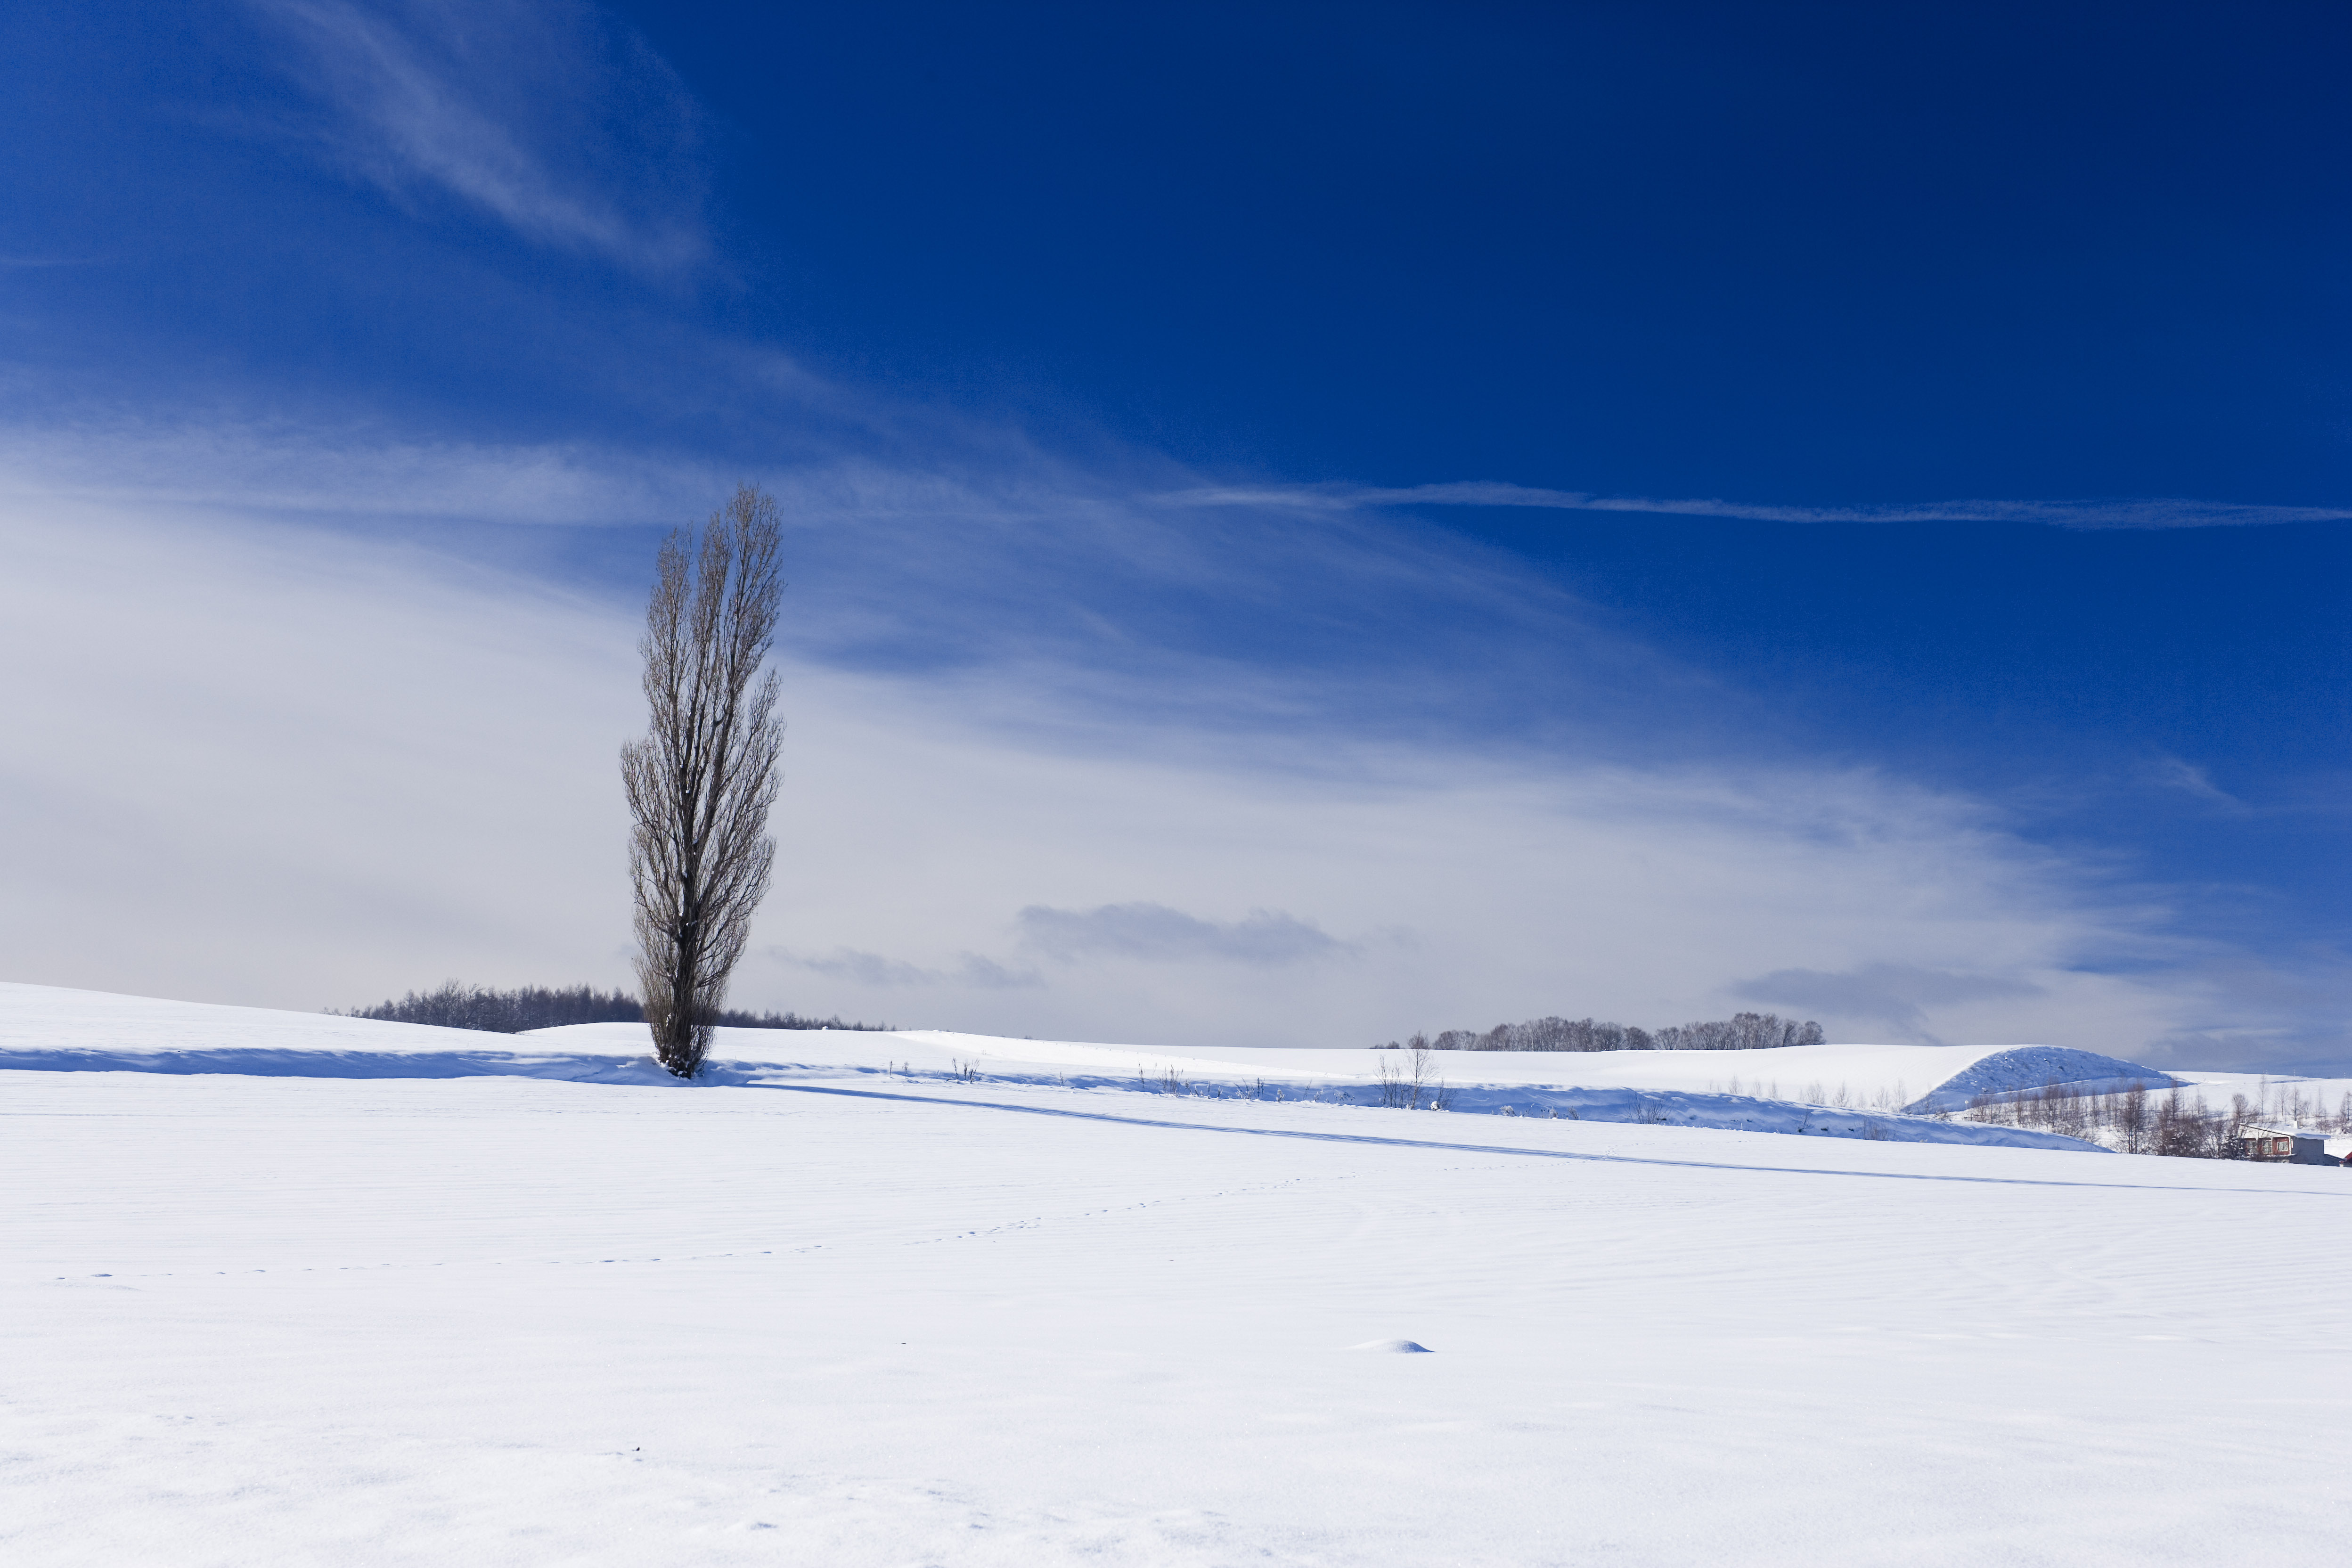 photo,material,free,landscape,picture,stock photo,Creative Commons,A snowy field, snowy field, mountain, tree, blue sky